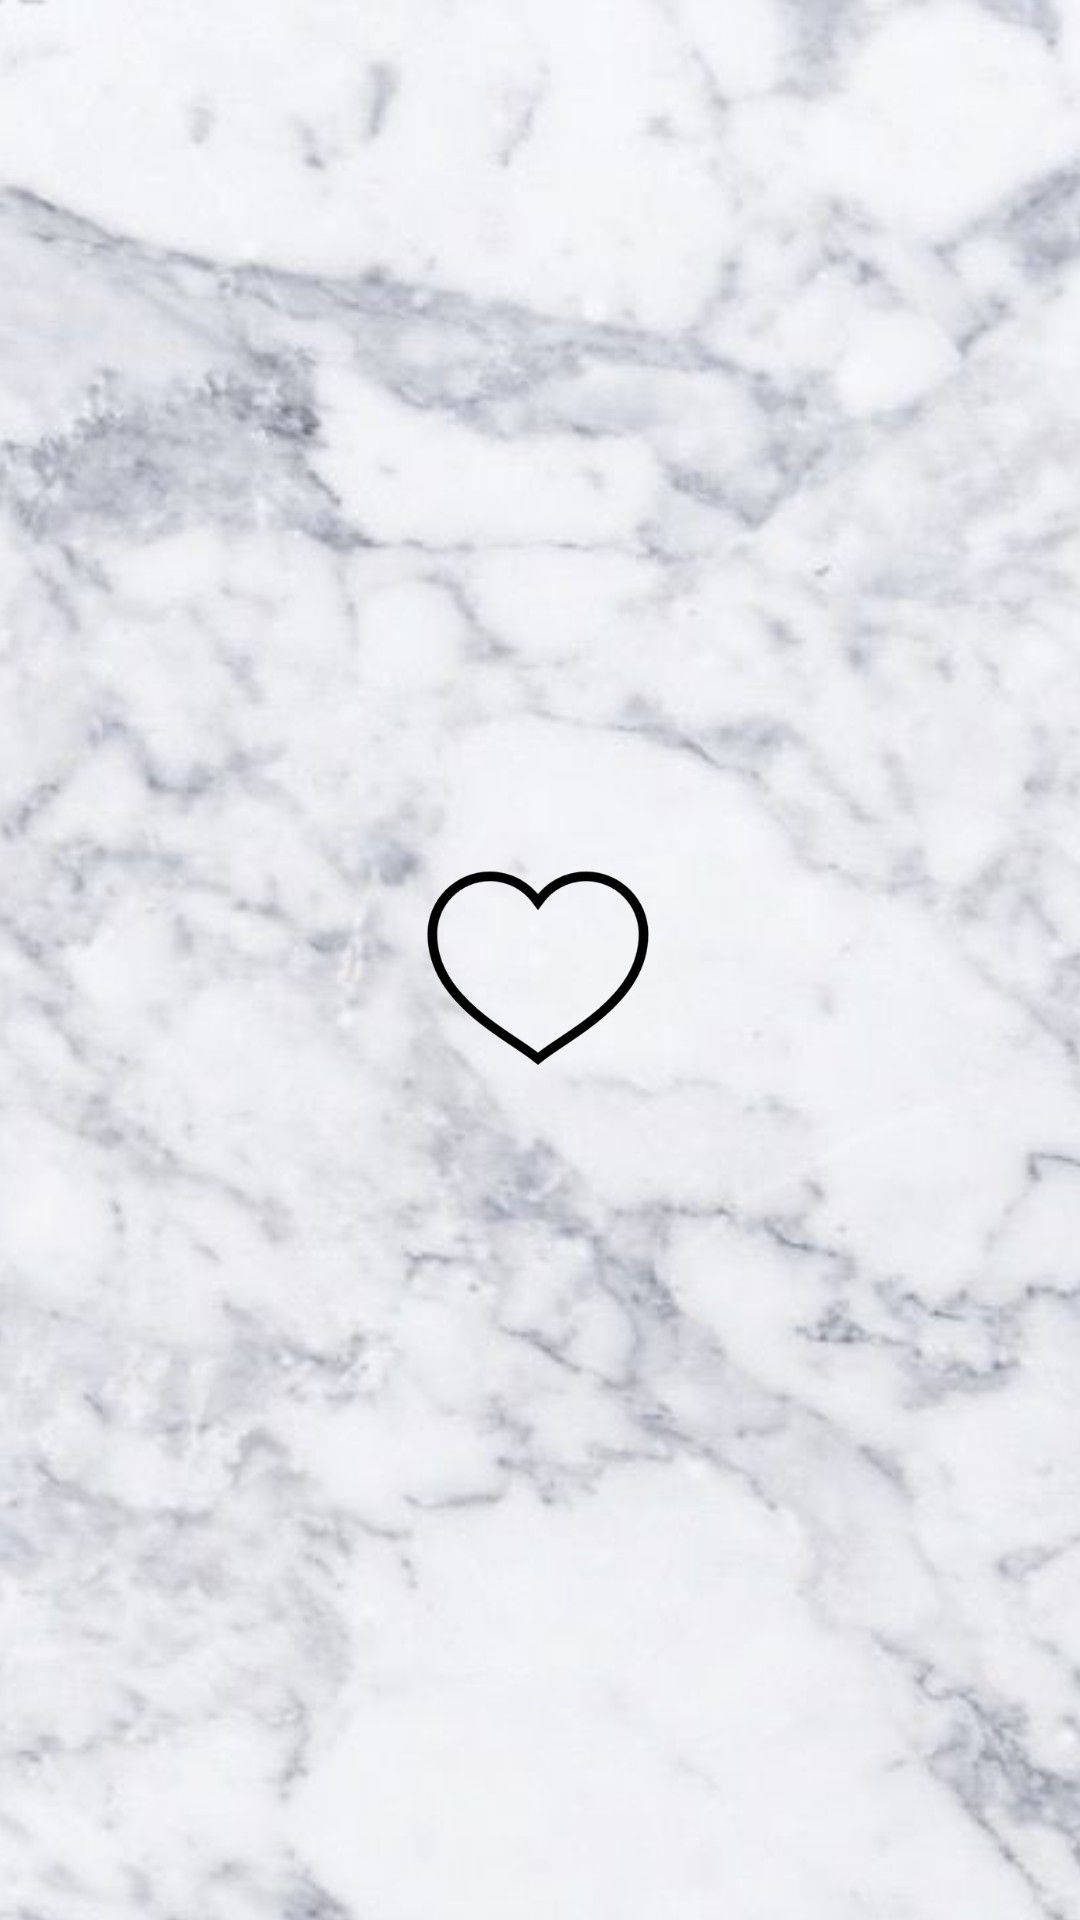 Hollow Heart Black White Marble Iphone Wallpaper